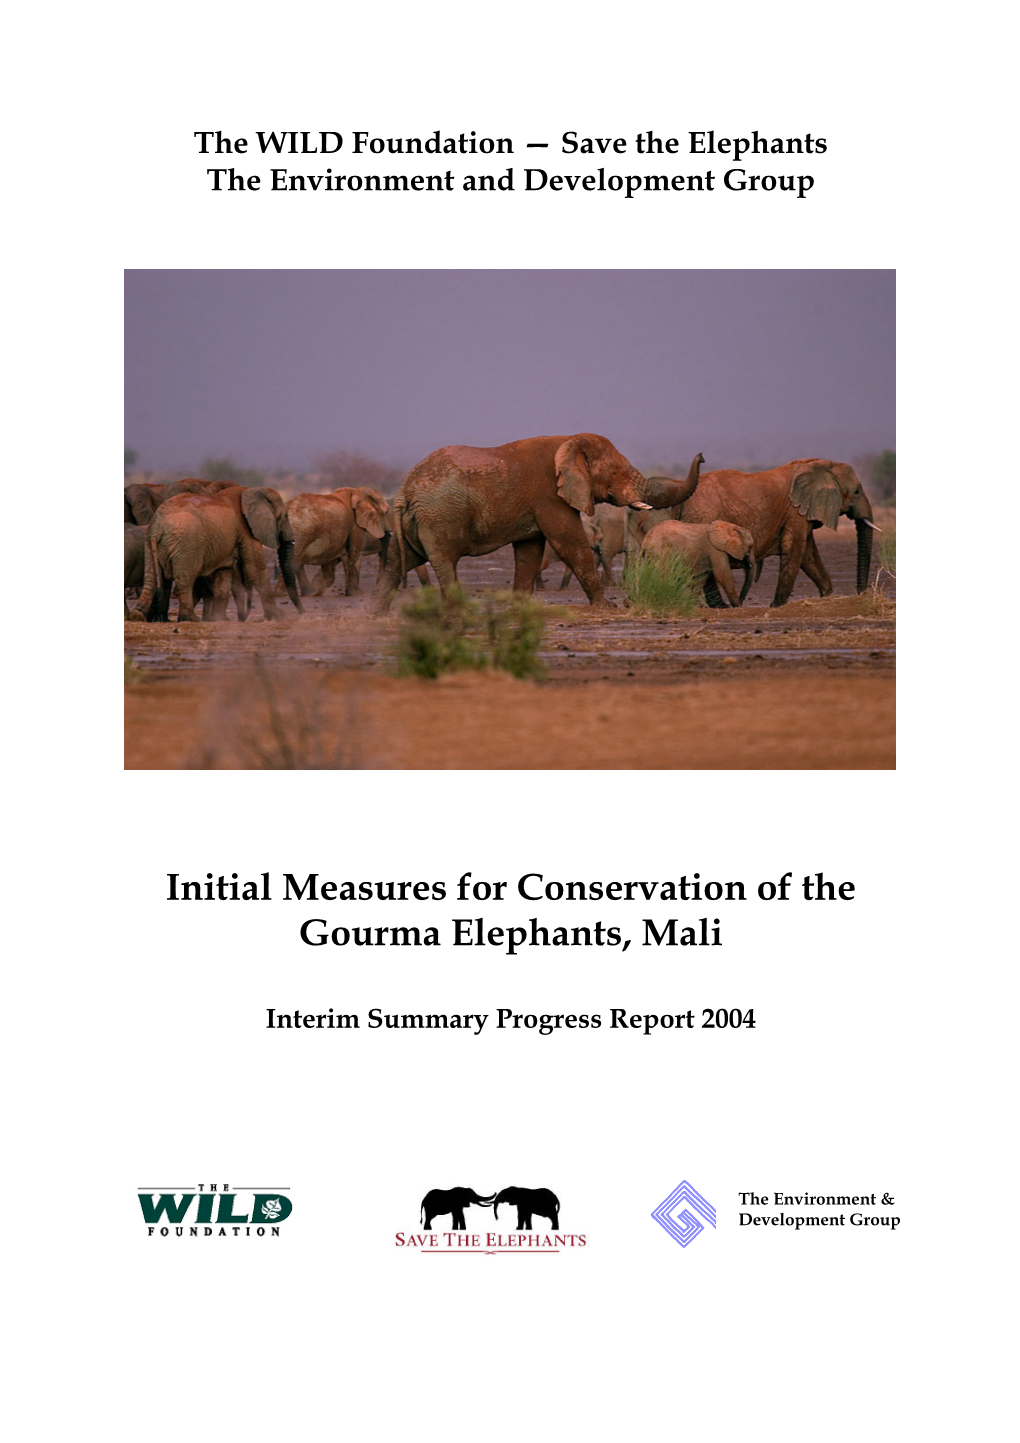 Initial Measures for Conservation of the Gourma Elephants, Mali